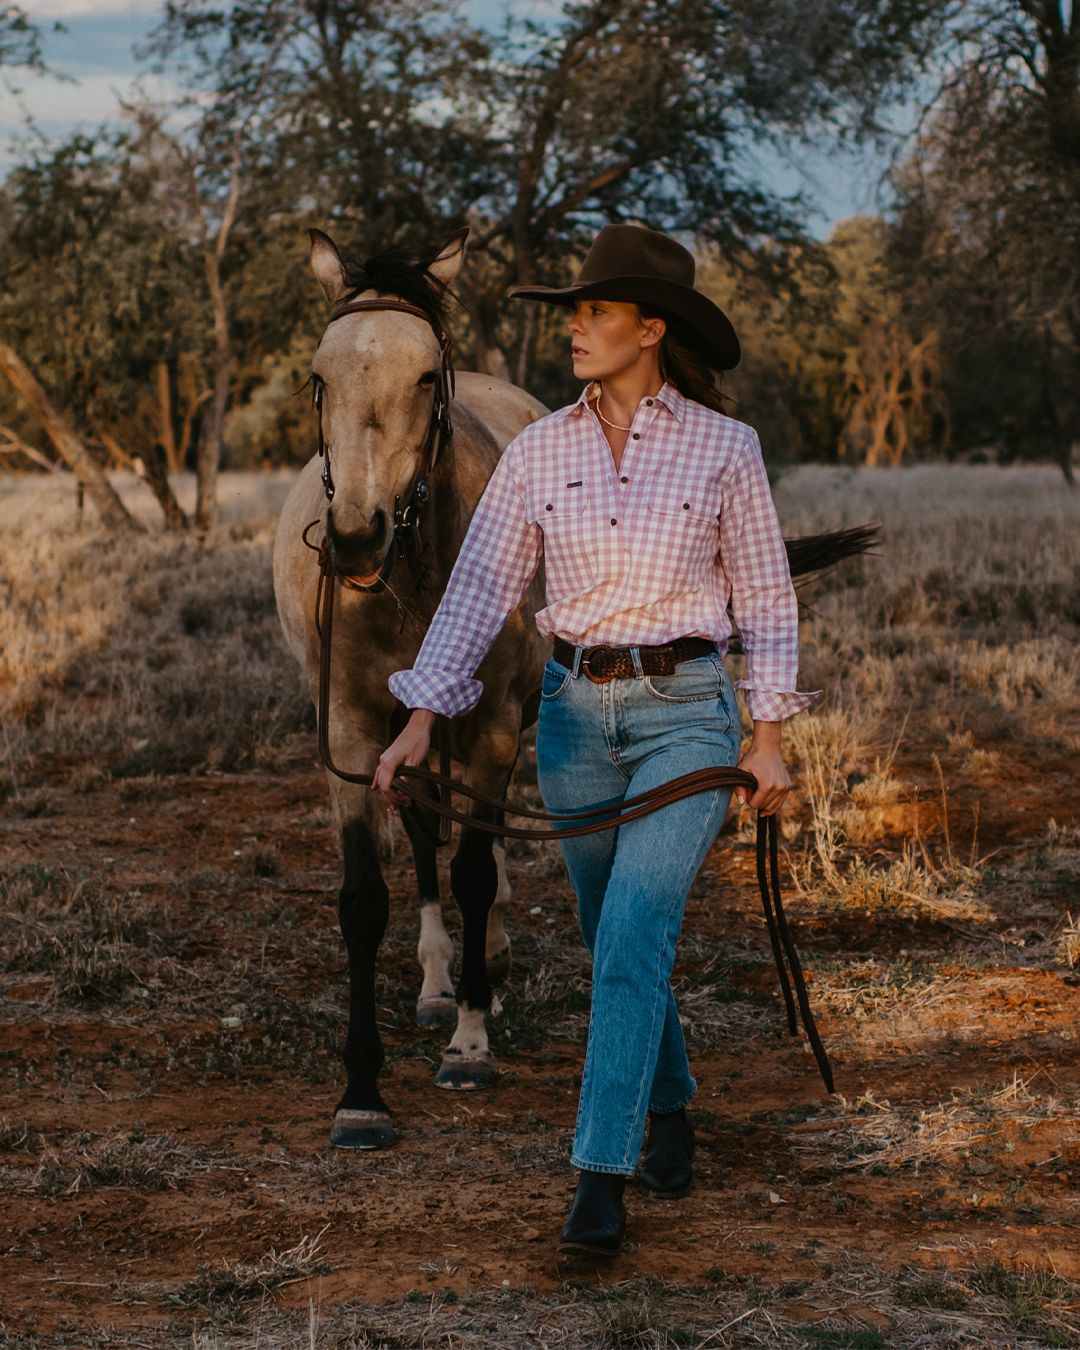 Limited Edition Sandy Workshirt

A hardworking shirt with sun-friendly fe...

Shop Women's New Arrivals via the link in bio. 

#RBSellars